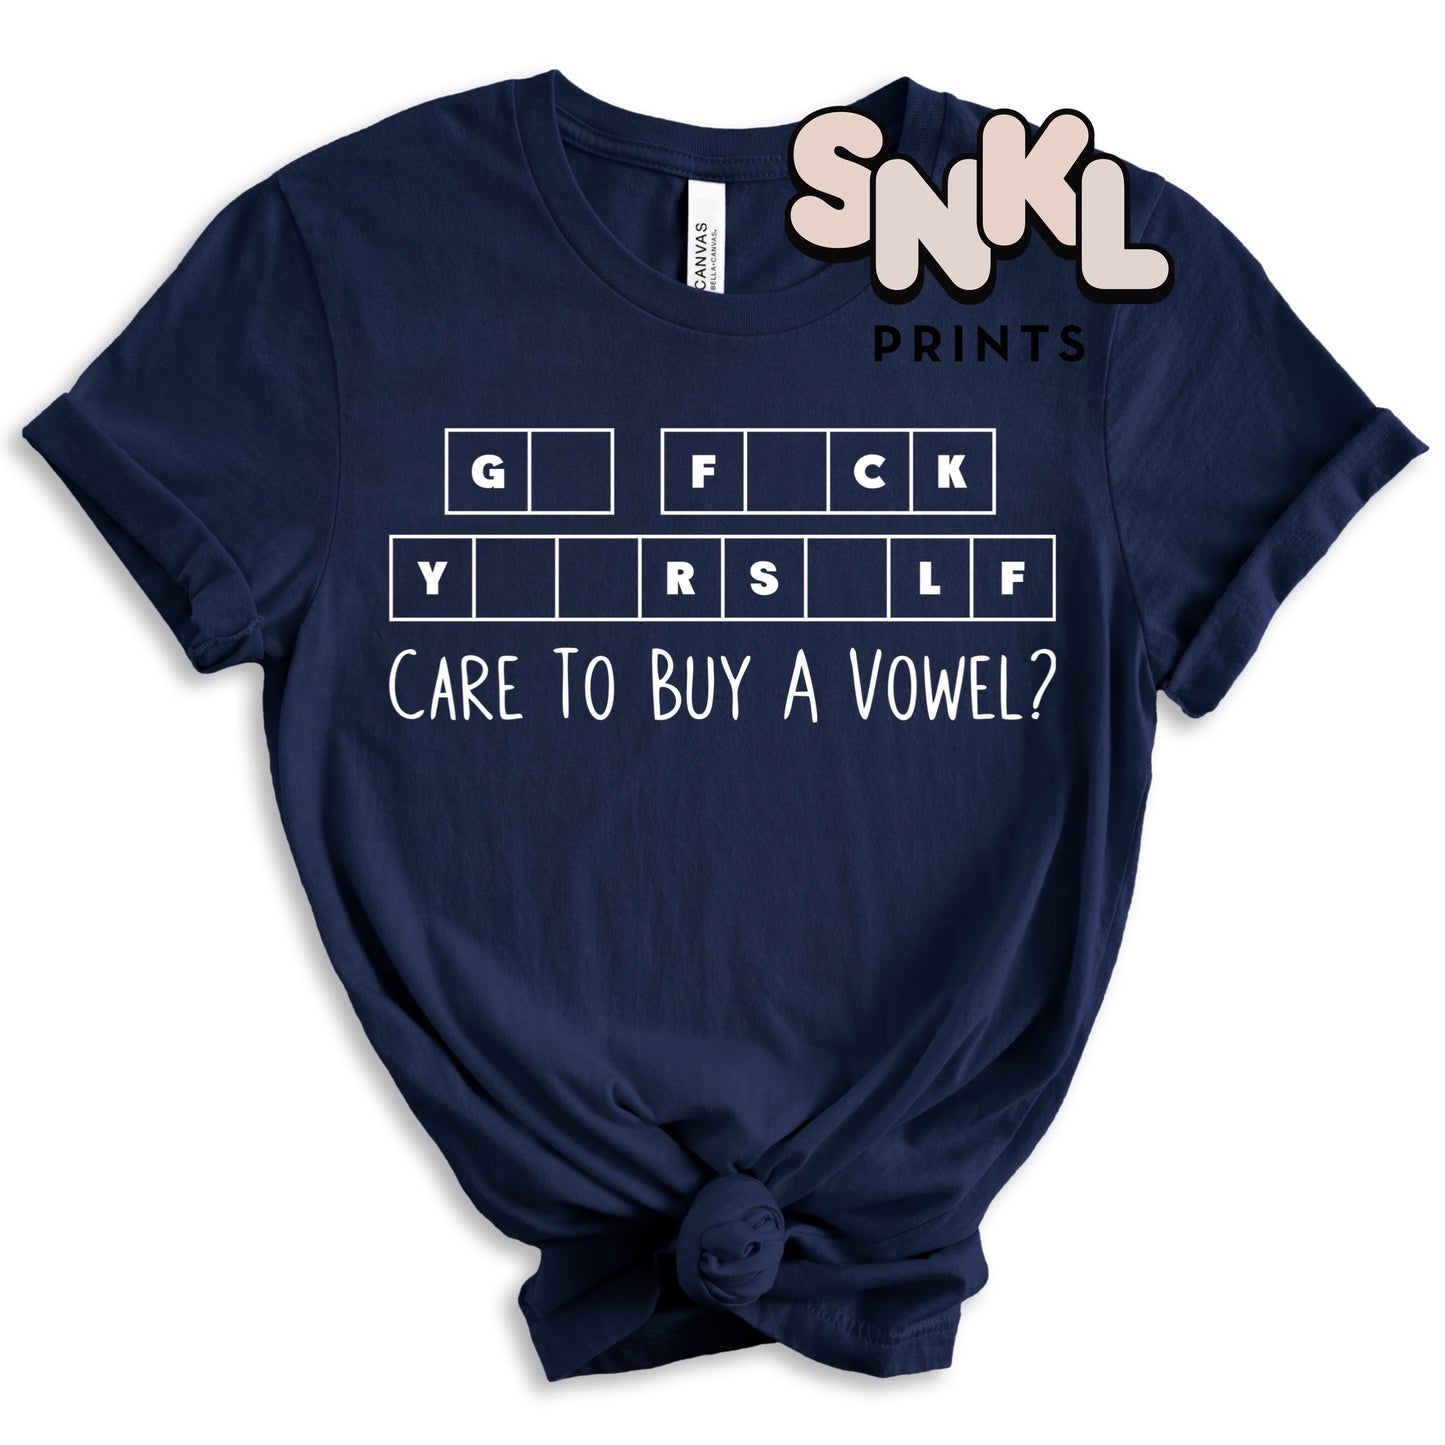 Care to Buy A Vowel? - SNKL Prints